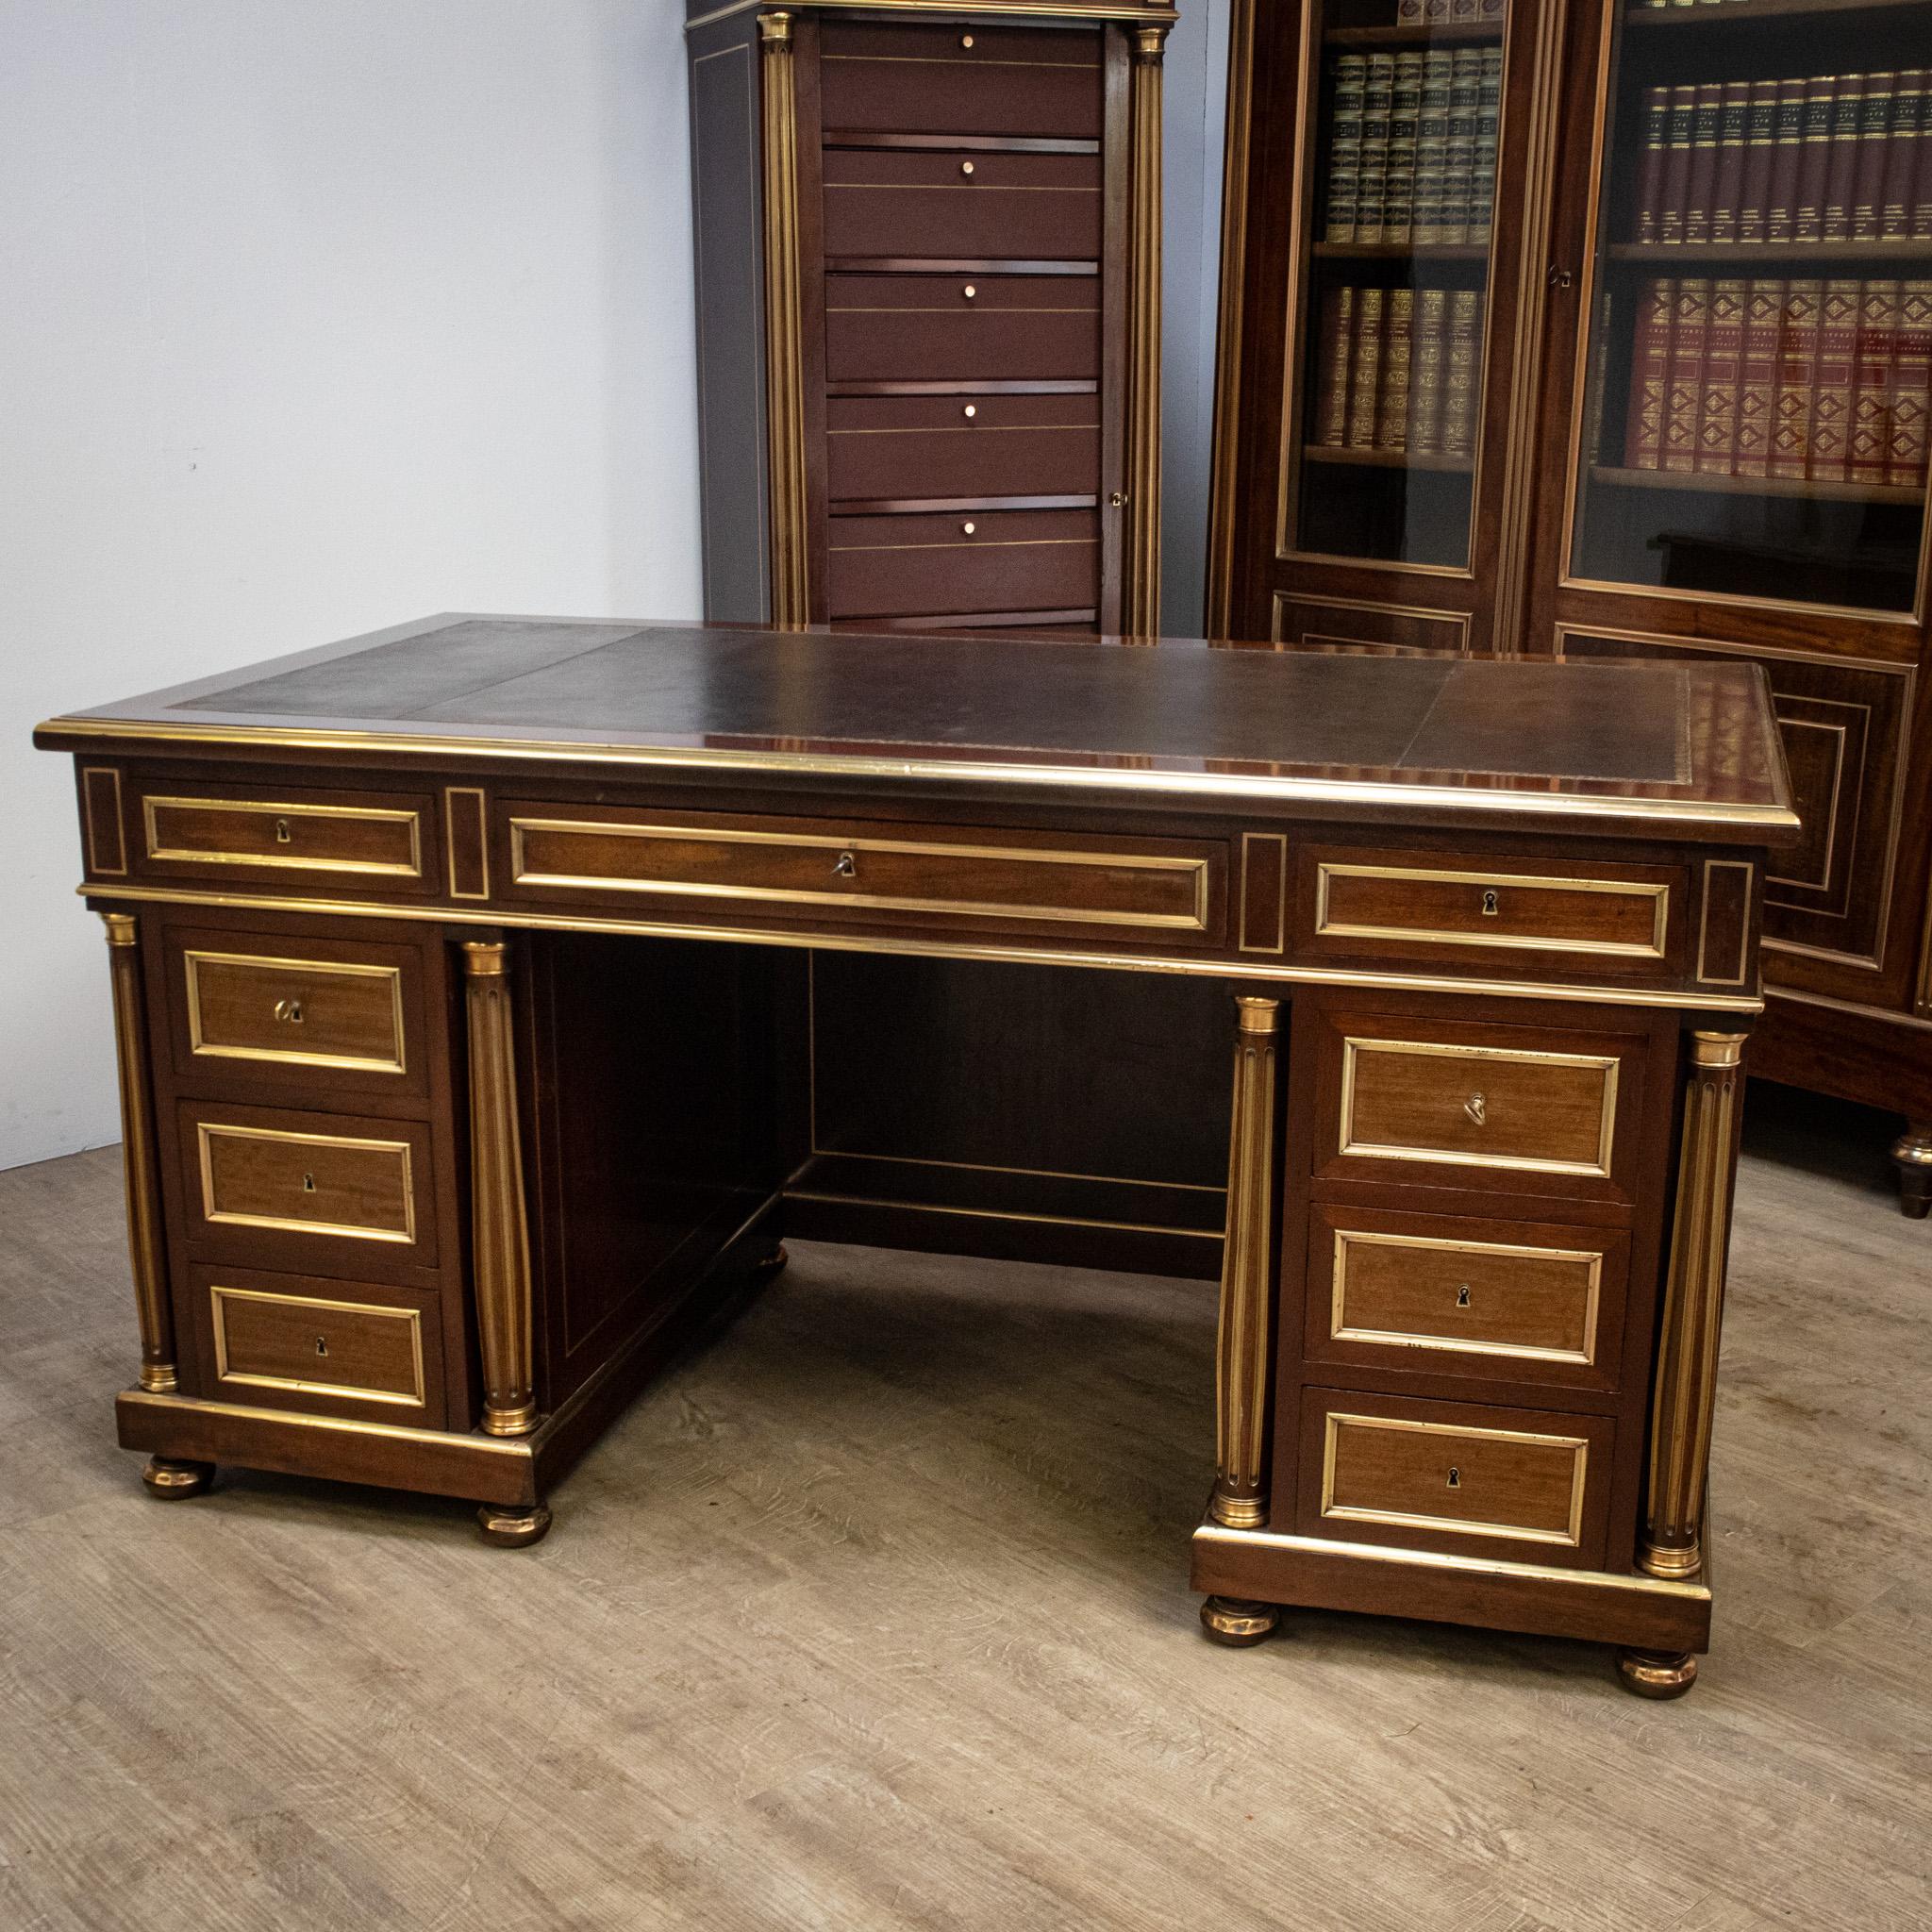 This beautiful quality mahogany and brass French Directoire style pedestal desk will make a lovely addition to any office, and we have a matching bookcase and box file cabinet listed separately, allowing an opulent office interior to be designed if